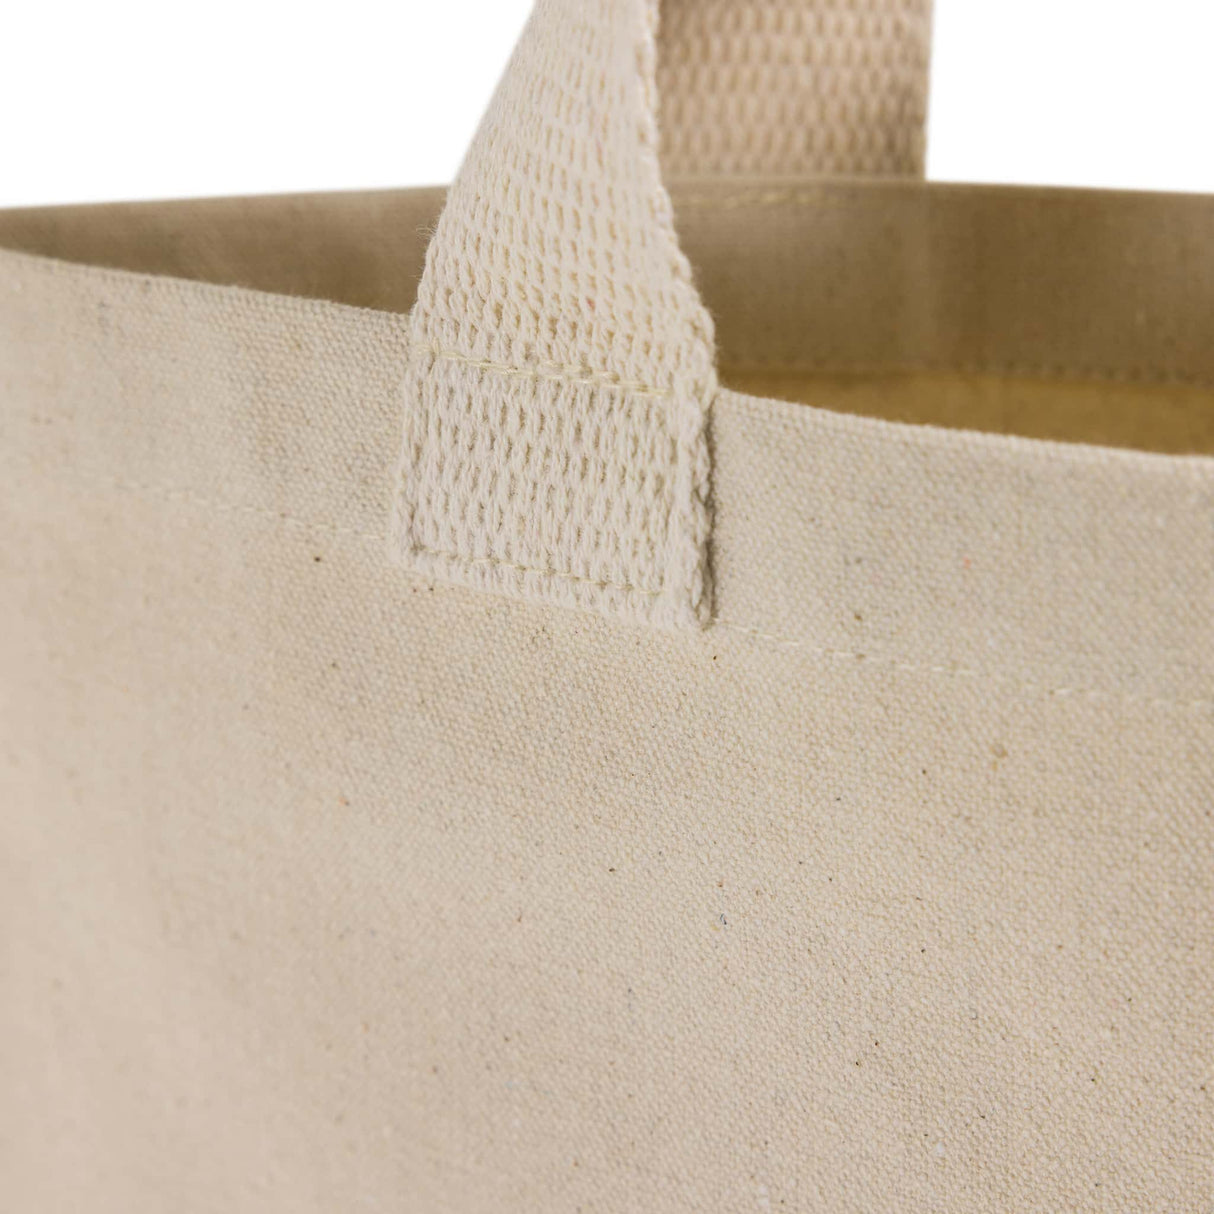 90 ct Recycled Canvas Tote Bag With Bottom Gusset - By Case